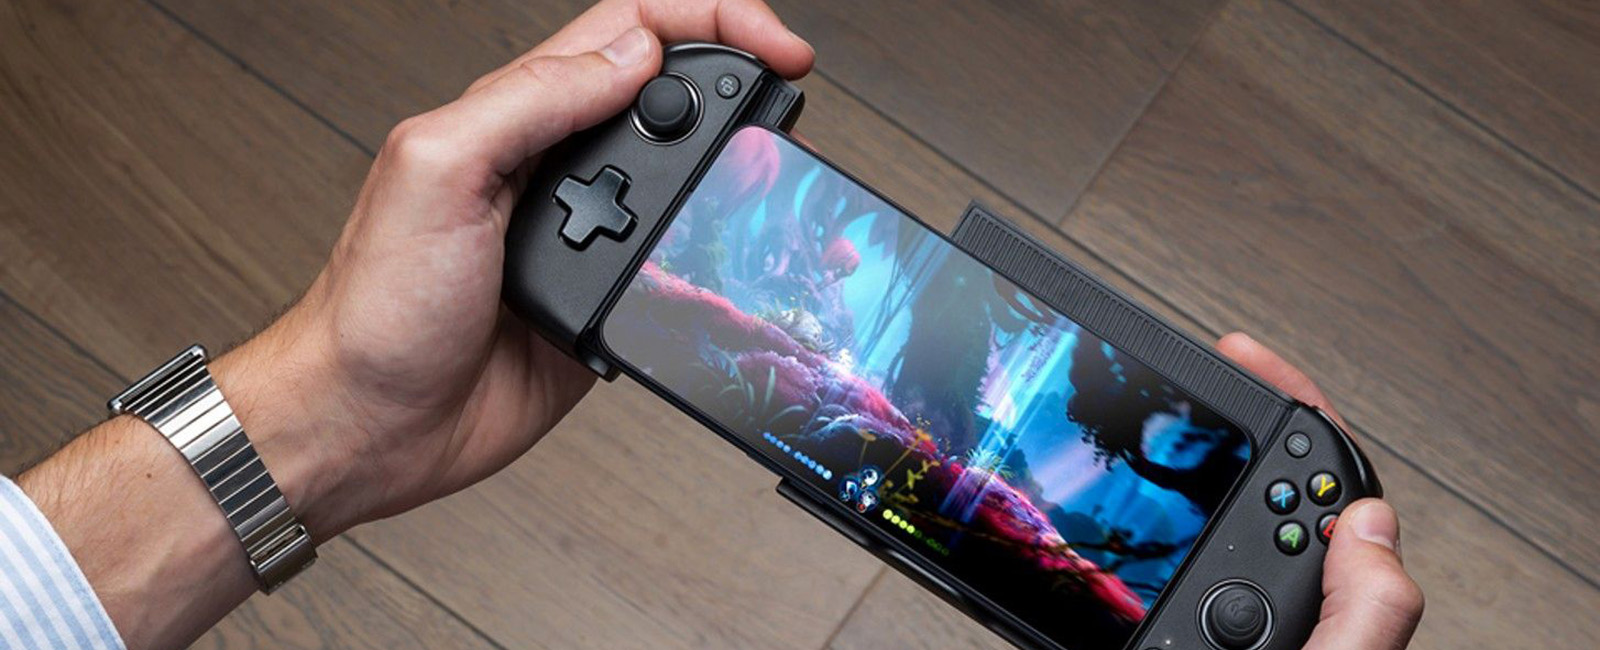 NACON MG-X | xCloud Android Controller Review - Pure Dead Gaming